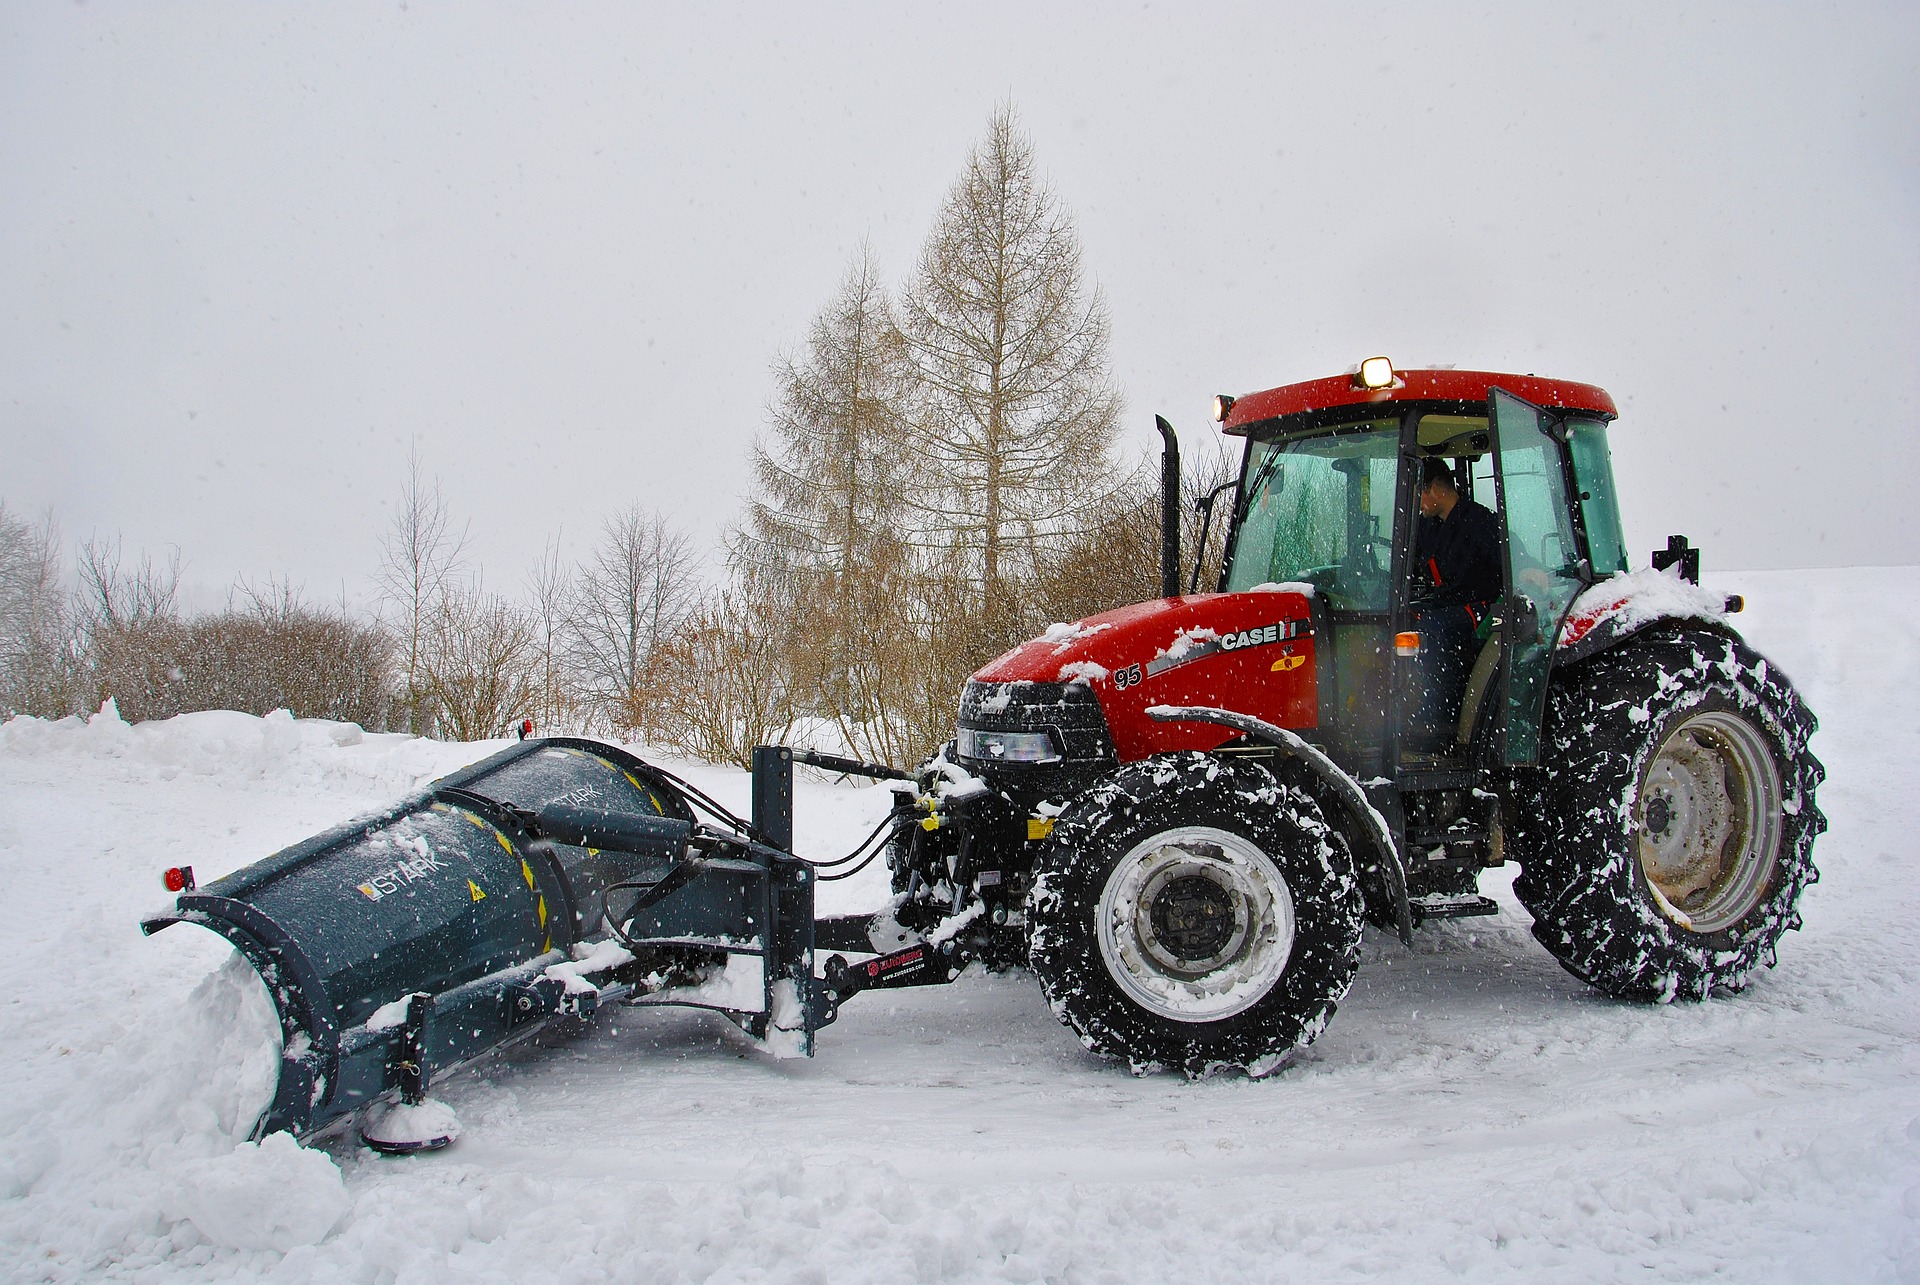 Ice, snow and cold temperatures can amplify problems and hazards for tractor operators. (Pixabay photo)